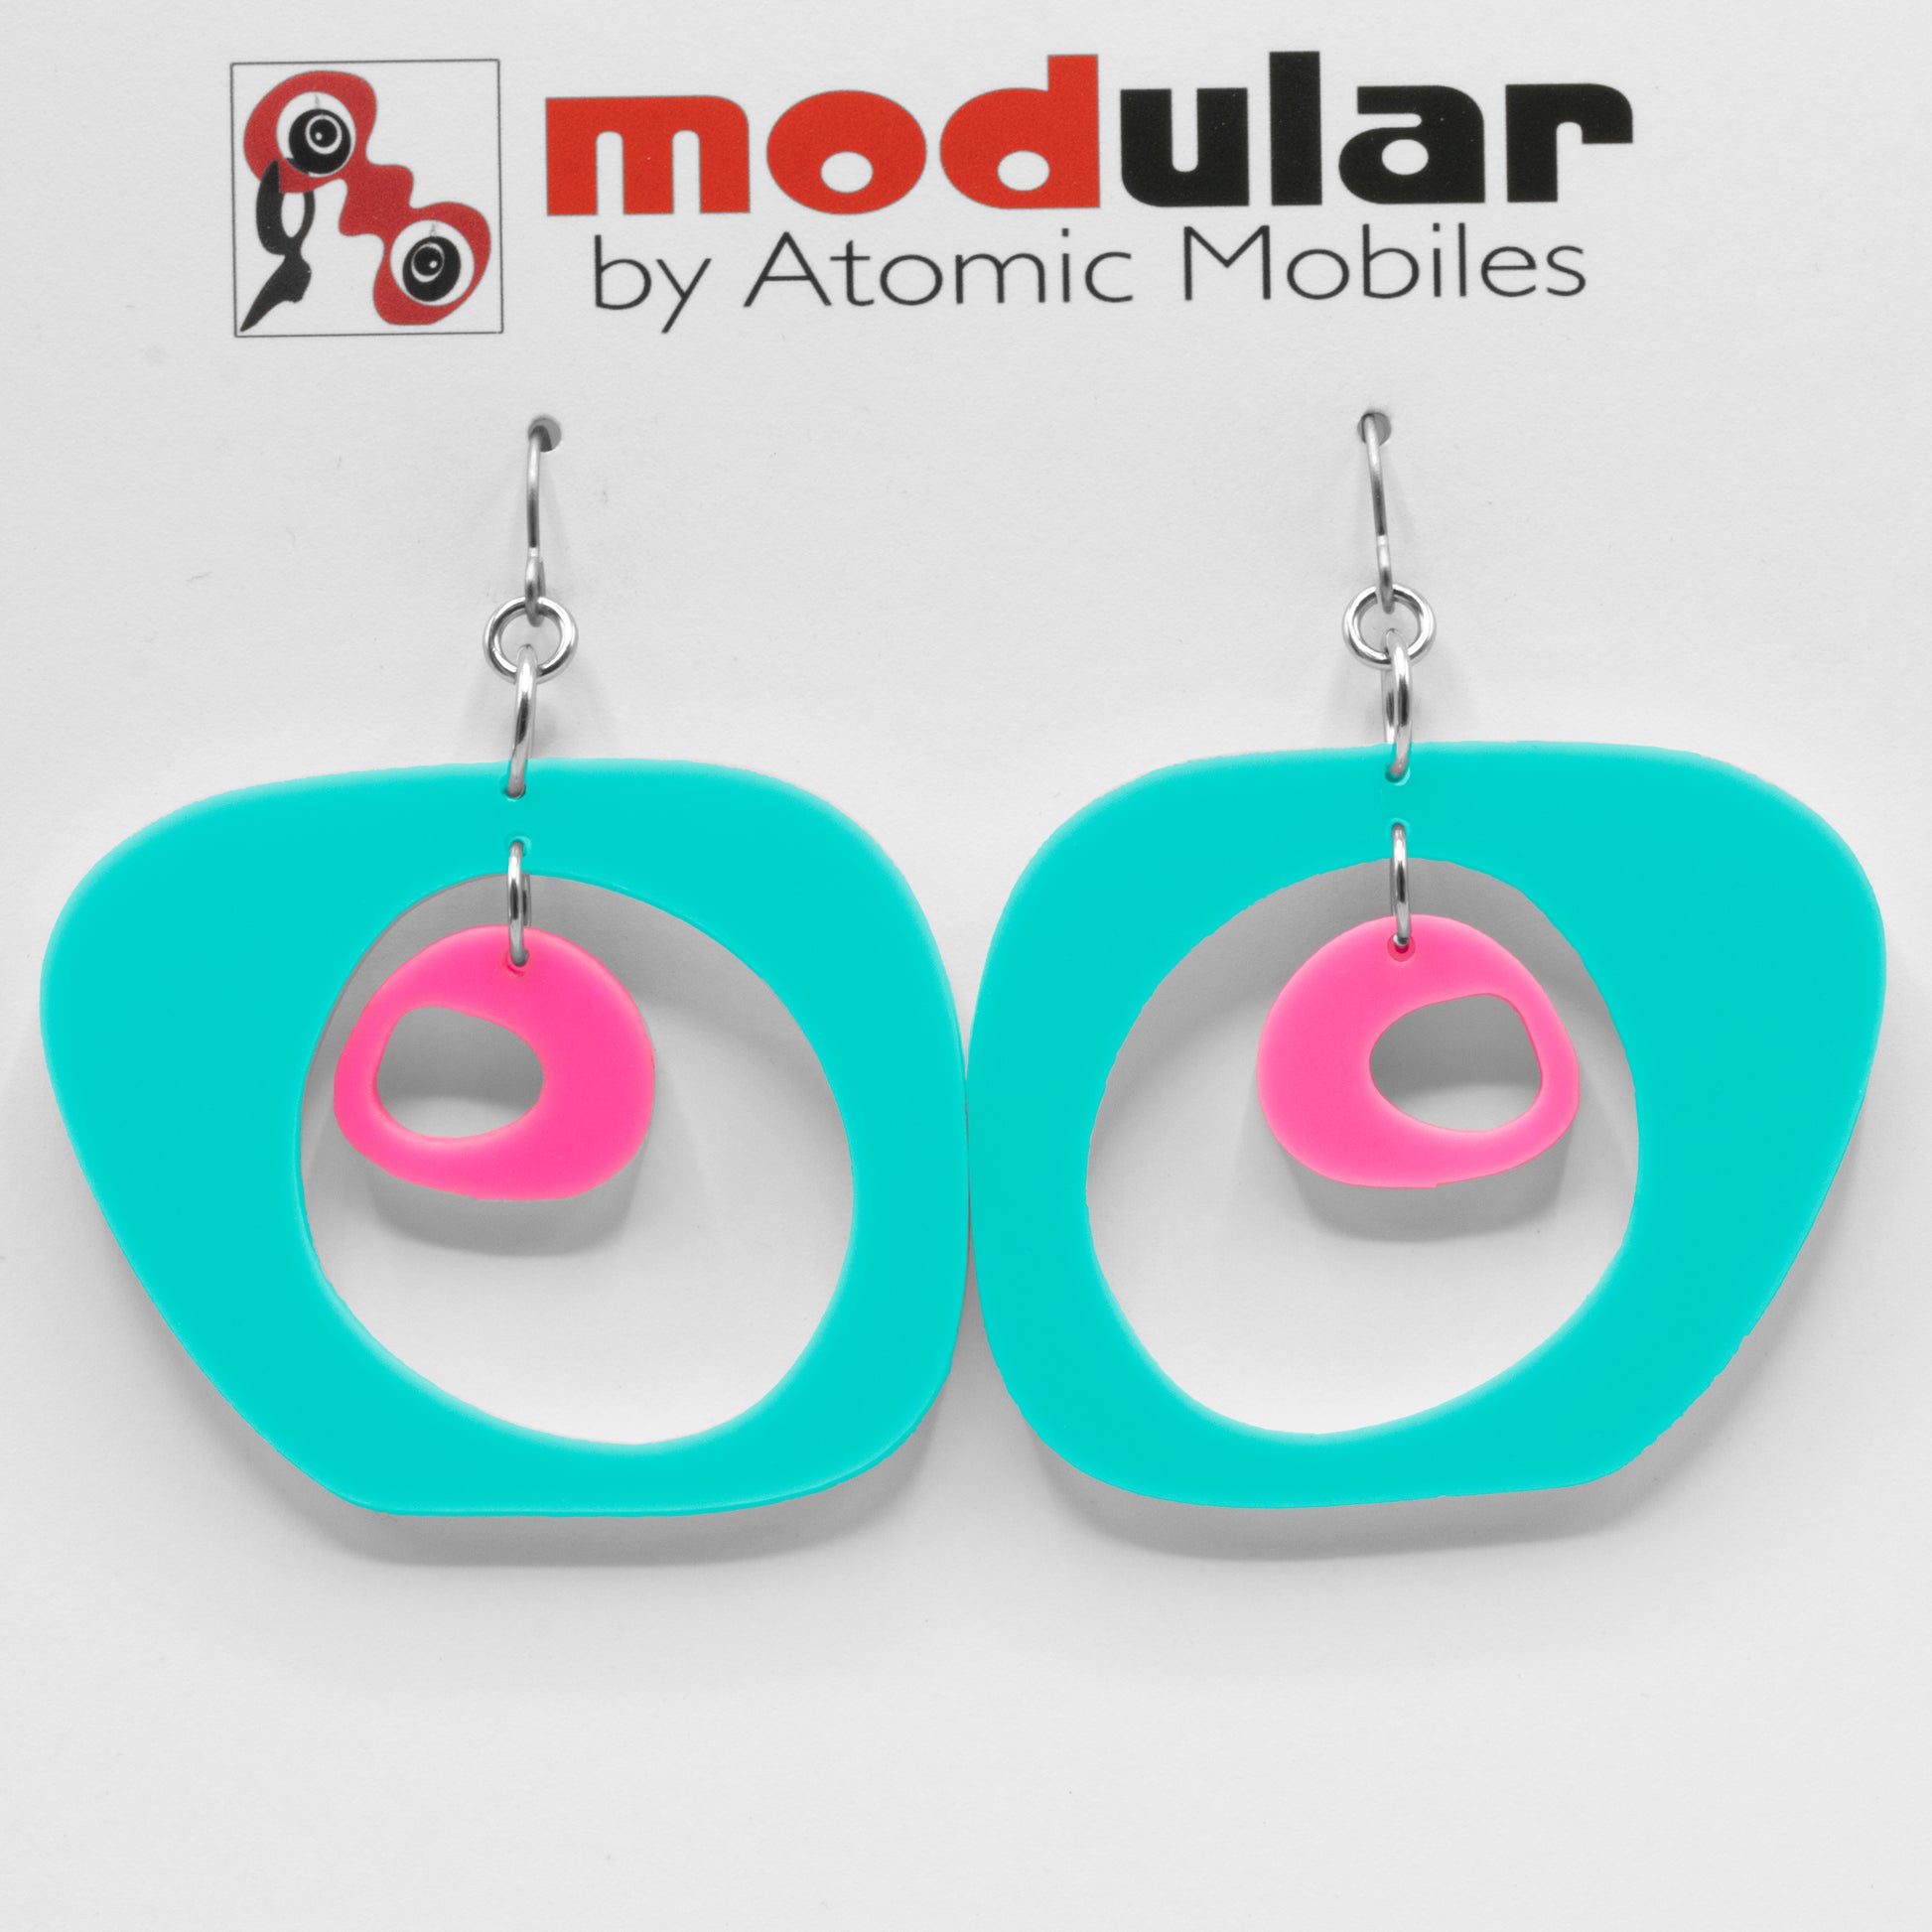 MODular Earrings - Paris Statement Earrings in Aqua and Hot Pink by AtomicMobiles.com - retro era inspired mod handmade jewelry